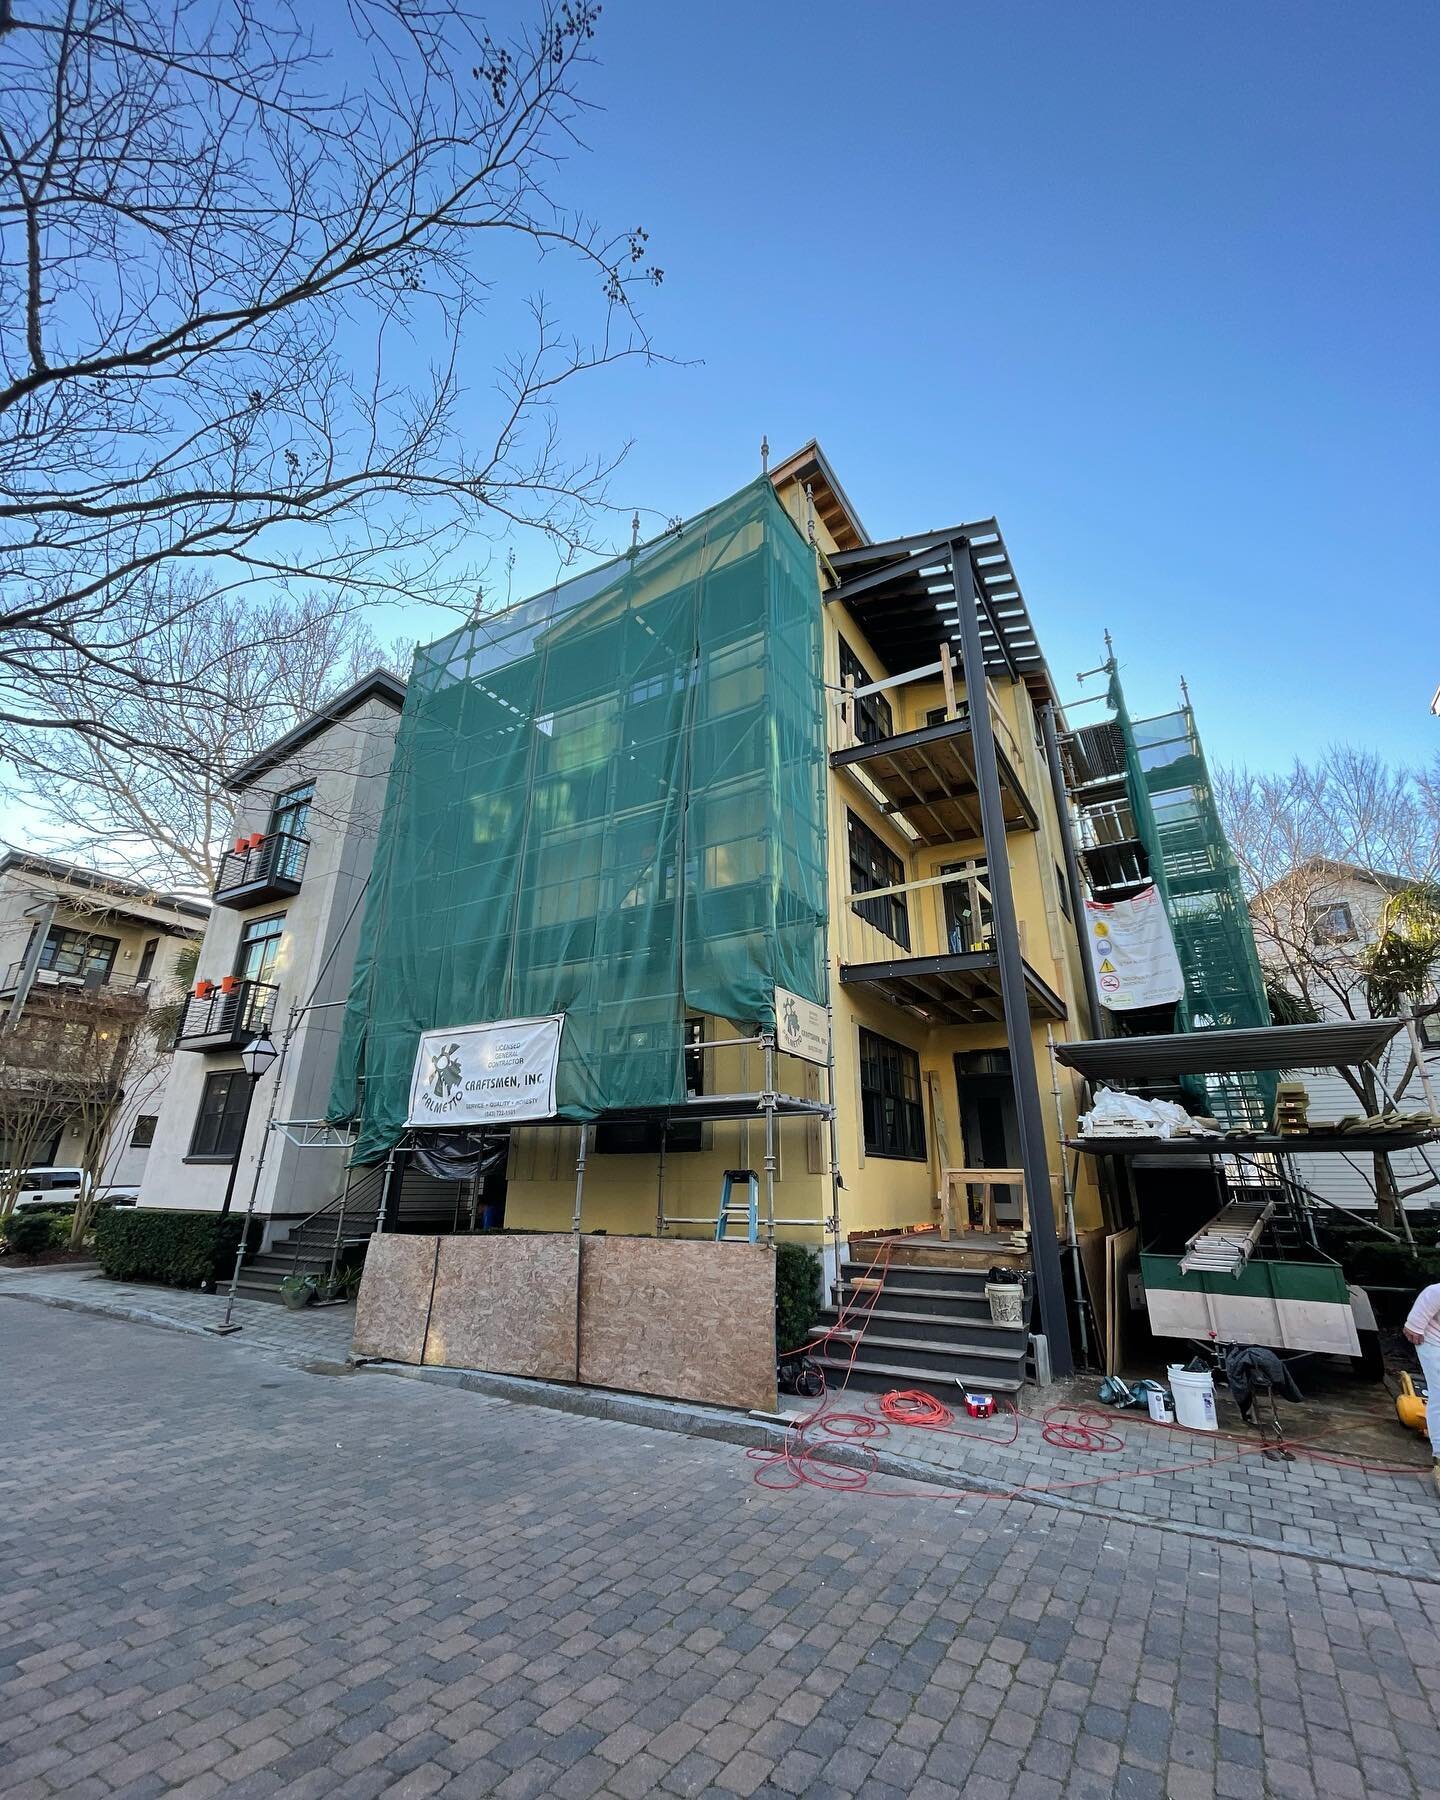 Scaffolding up ✅ Siding delivered ✅ 

Excited to start our latest James Hardie siding project for Palmetto Craftsmen in downtown Charleston!

#sidingcontractor #newconstruction #remodelingcontractors #downtowncharleston #charleston #jameshardie #prem